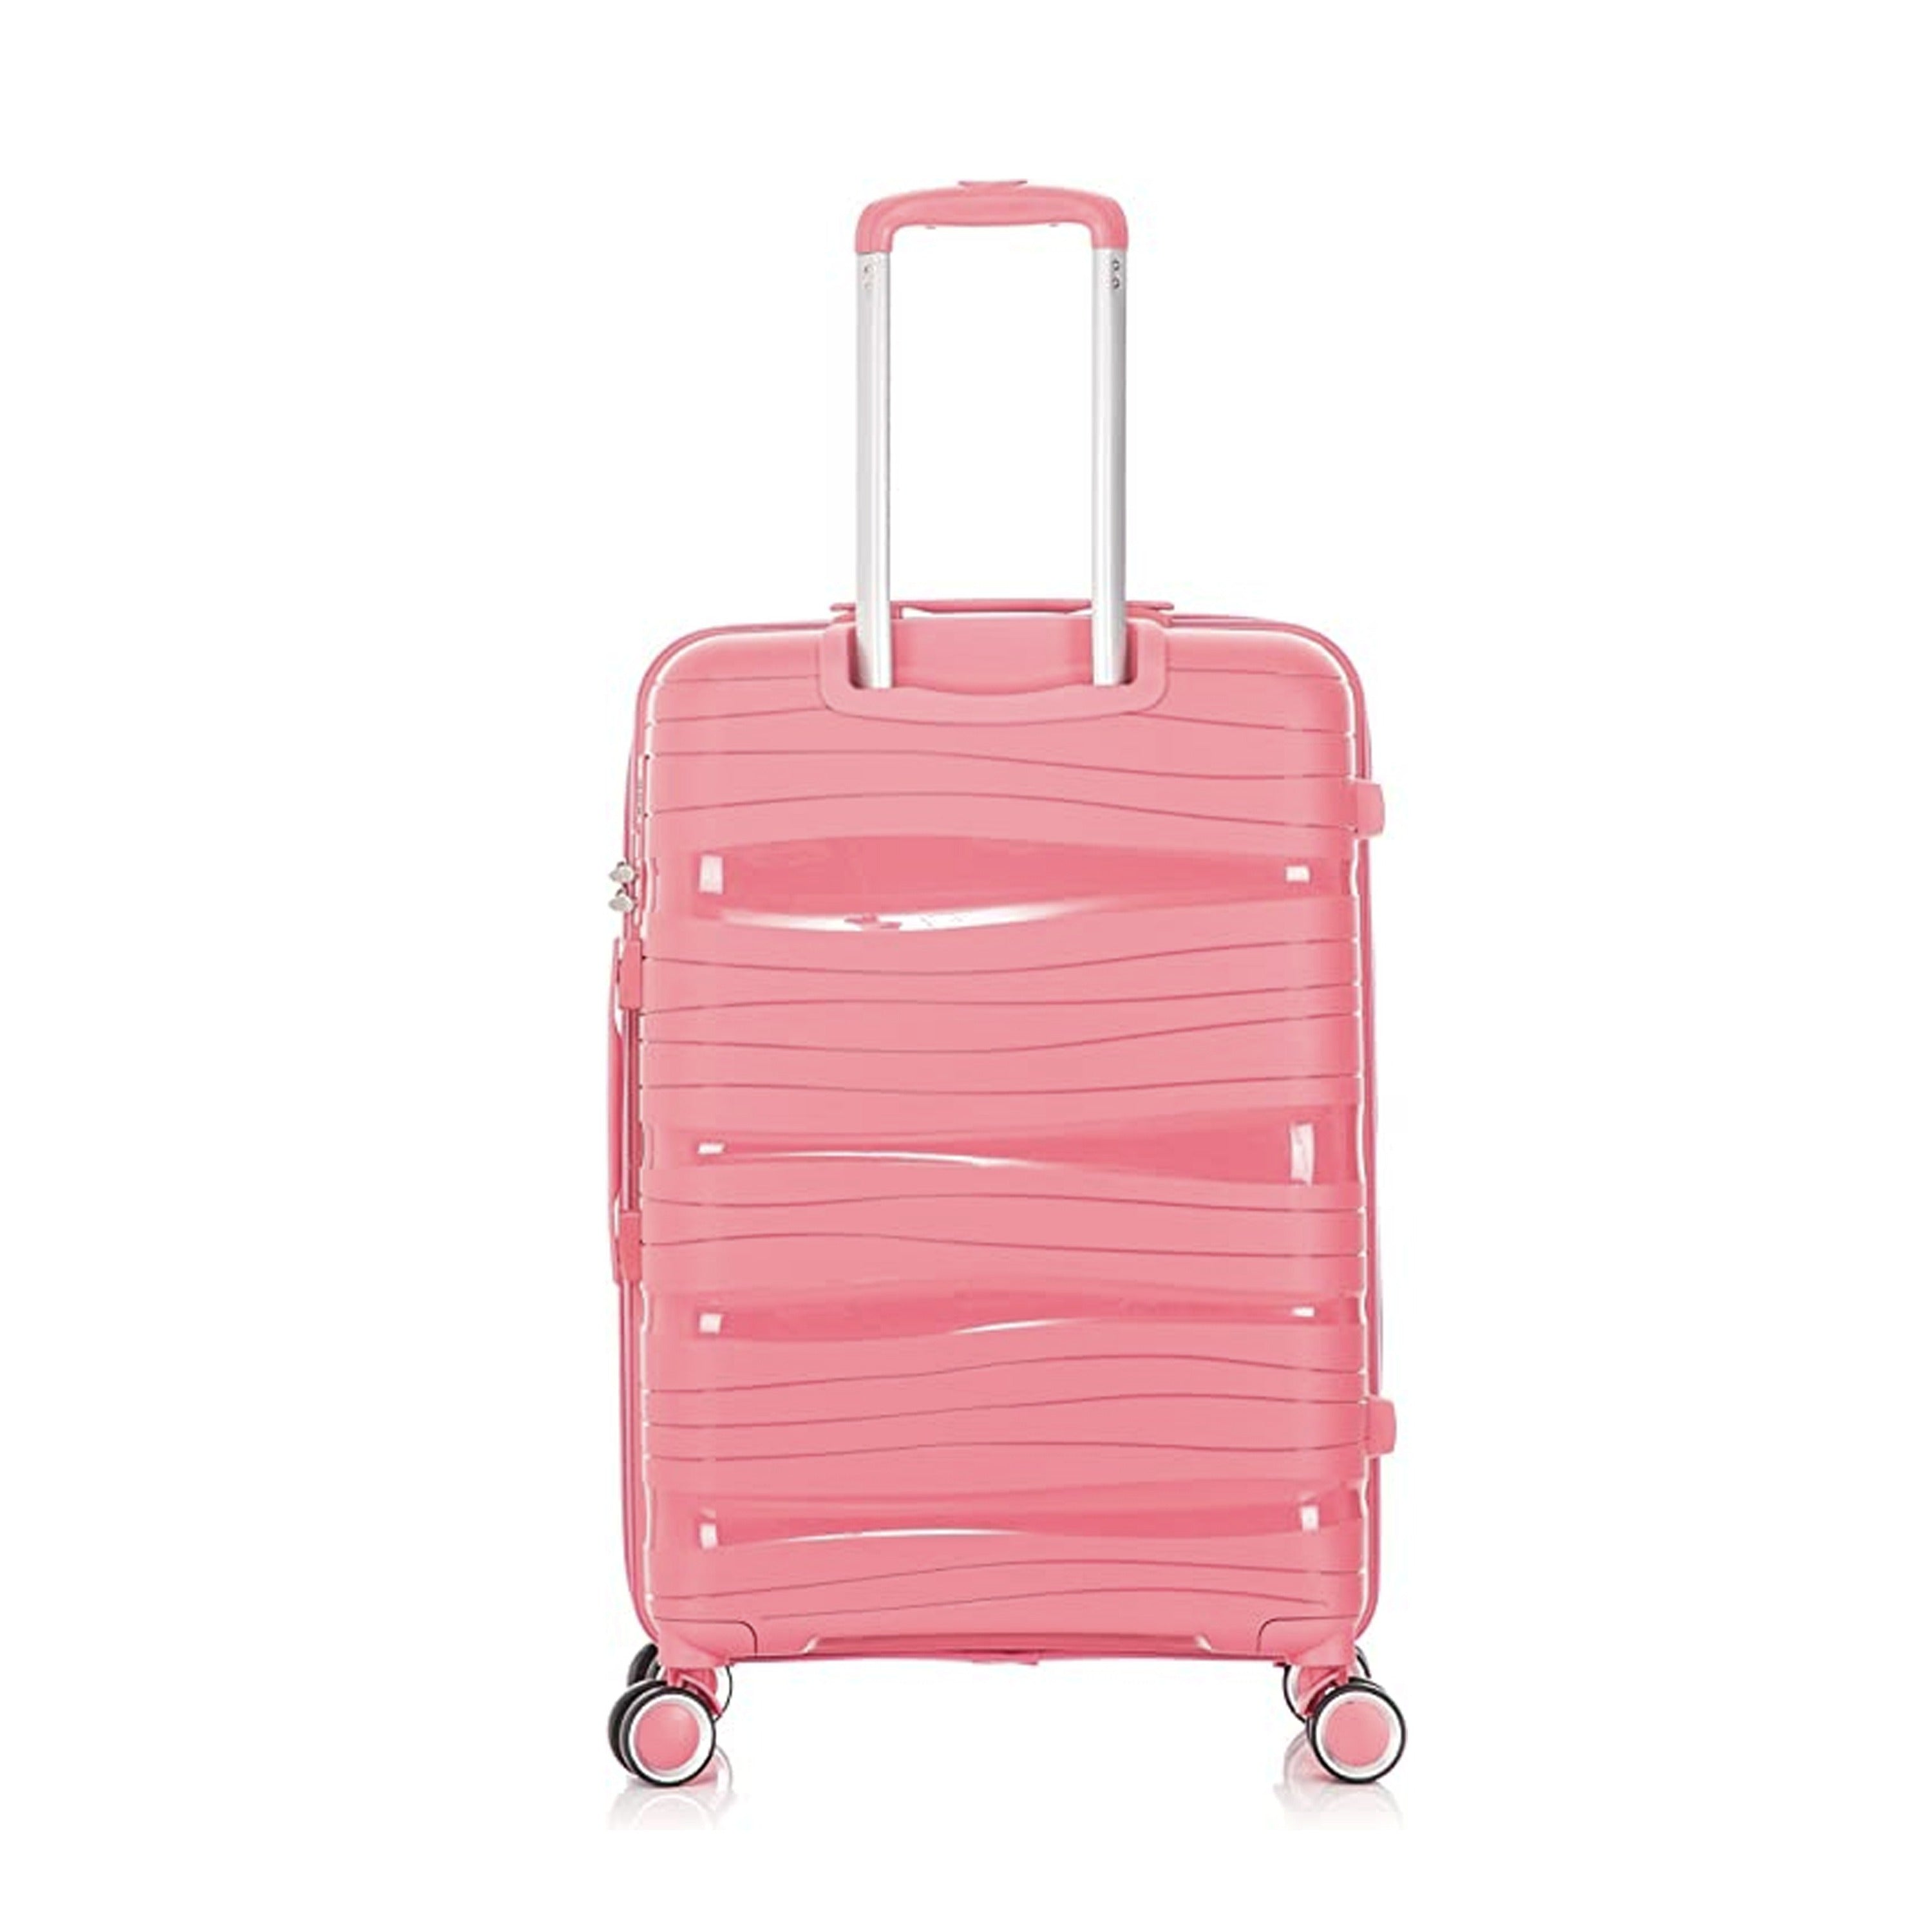 24" Light Pink Colour Royal PP Luggage Lightweight Hard Case Trolley Bag with Double Spinner Wheel